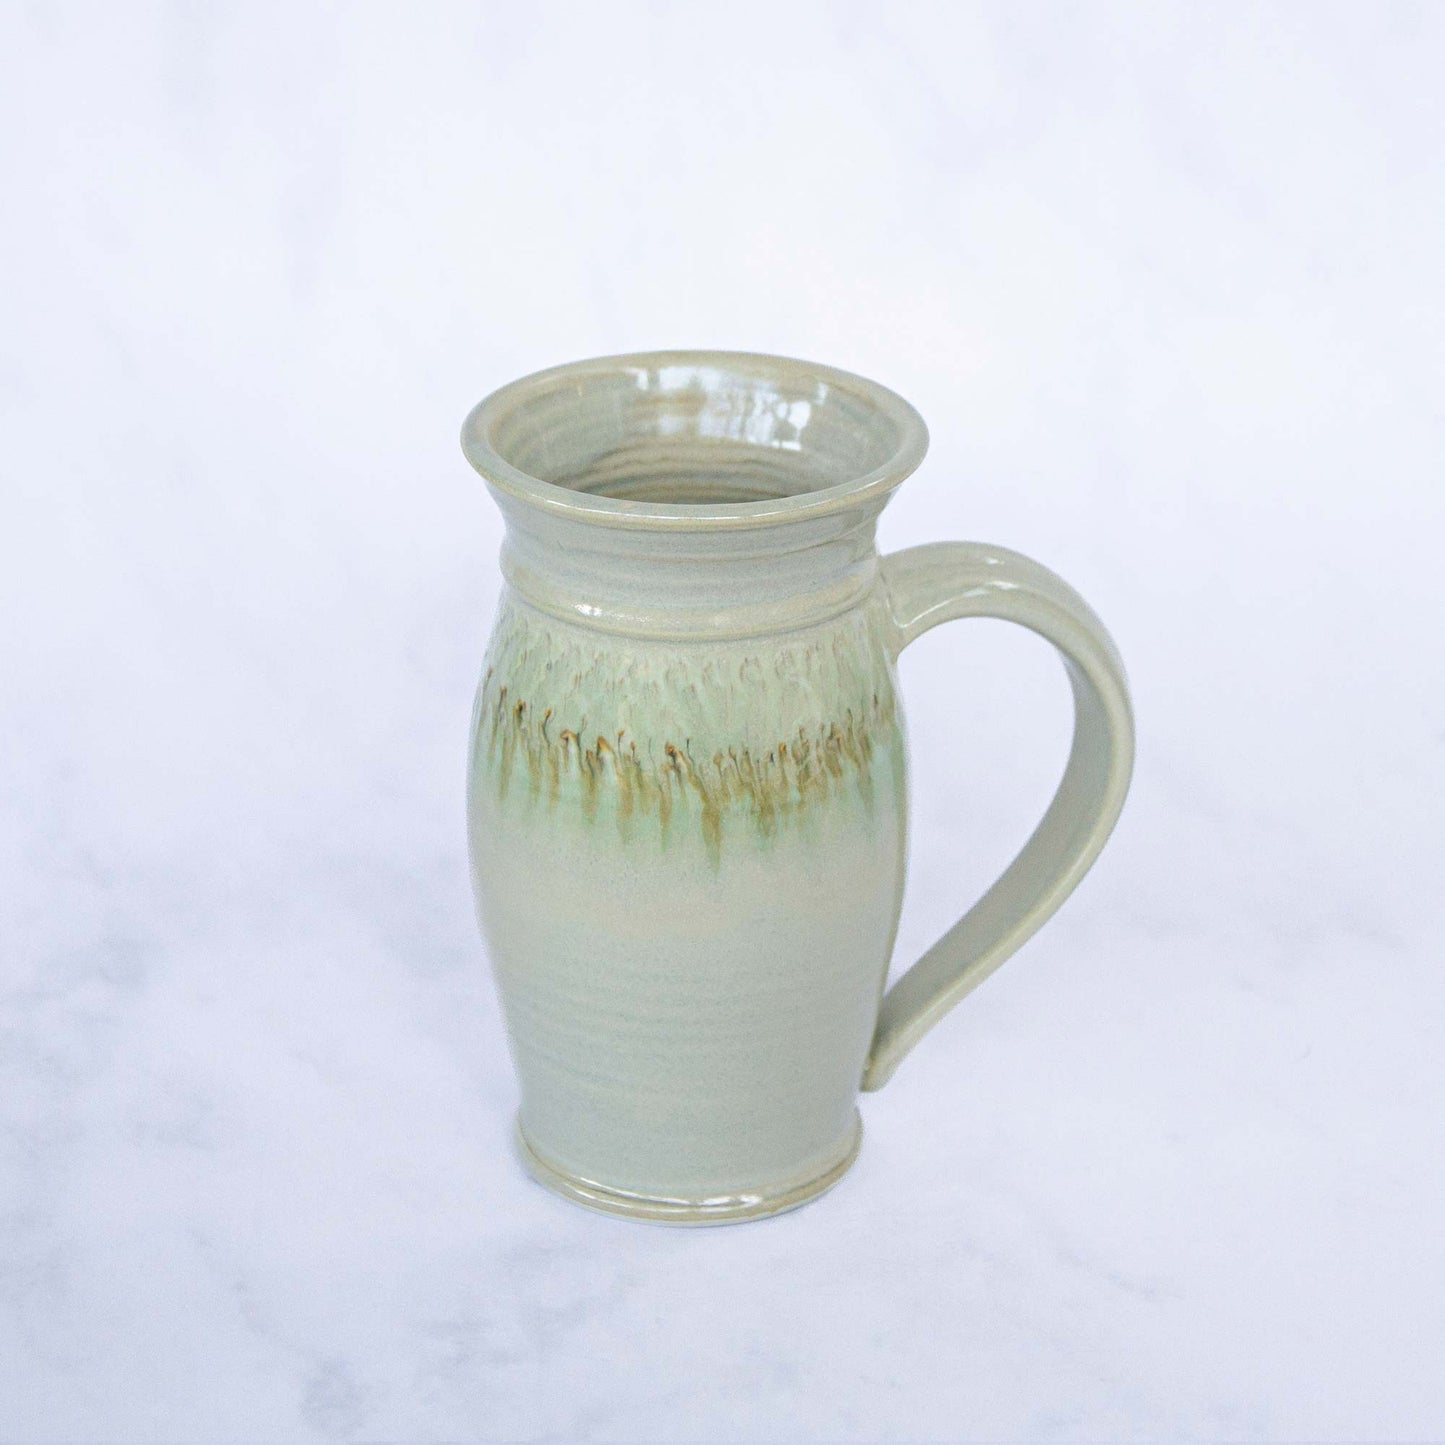 Handmade Pottery Beer Stein in Ivory & Green pattern made by Georgetown Pottery in Maine